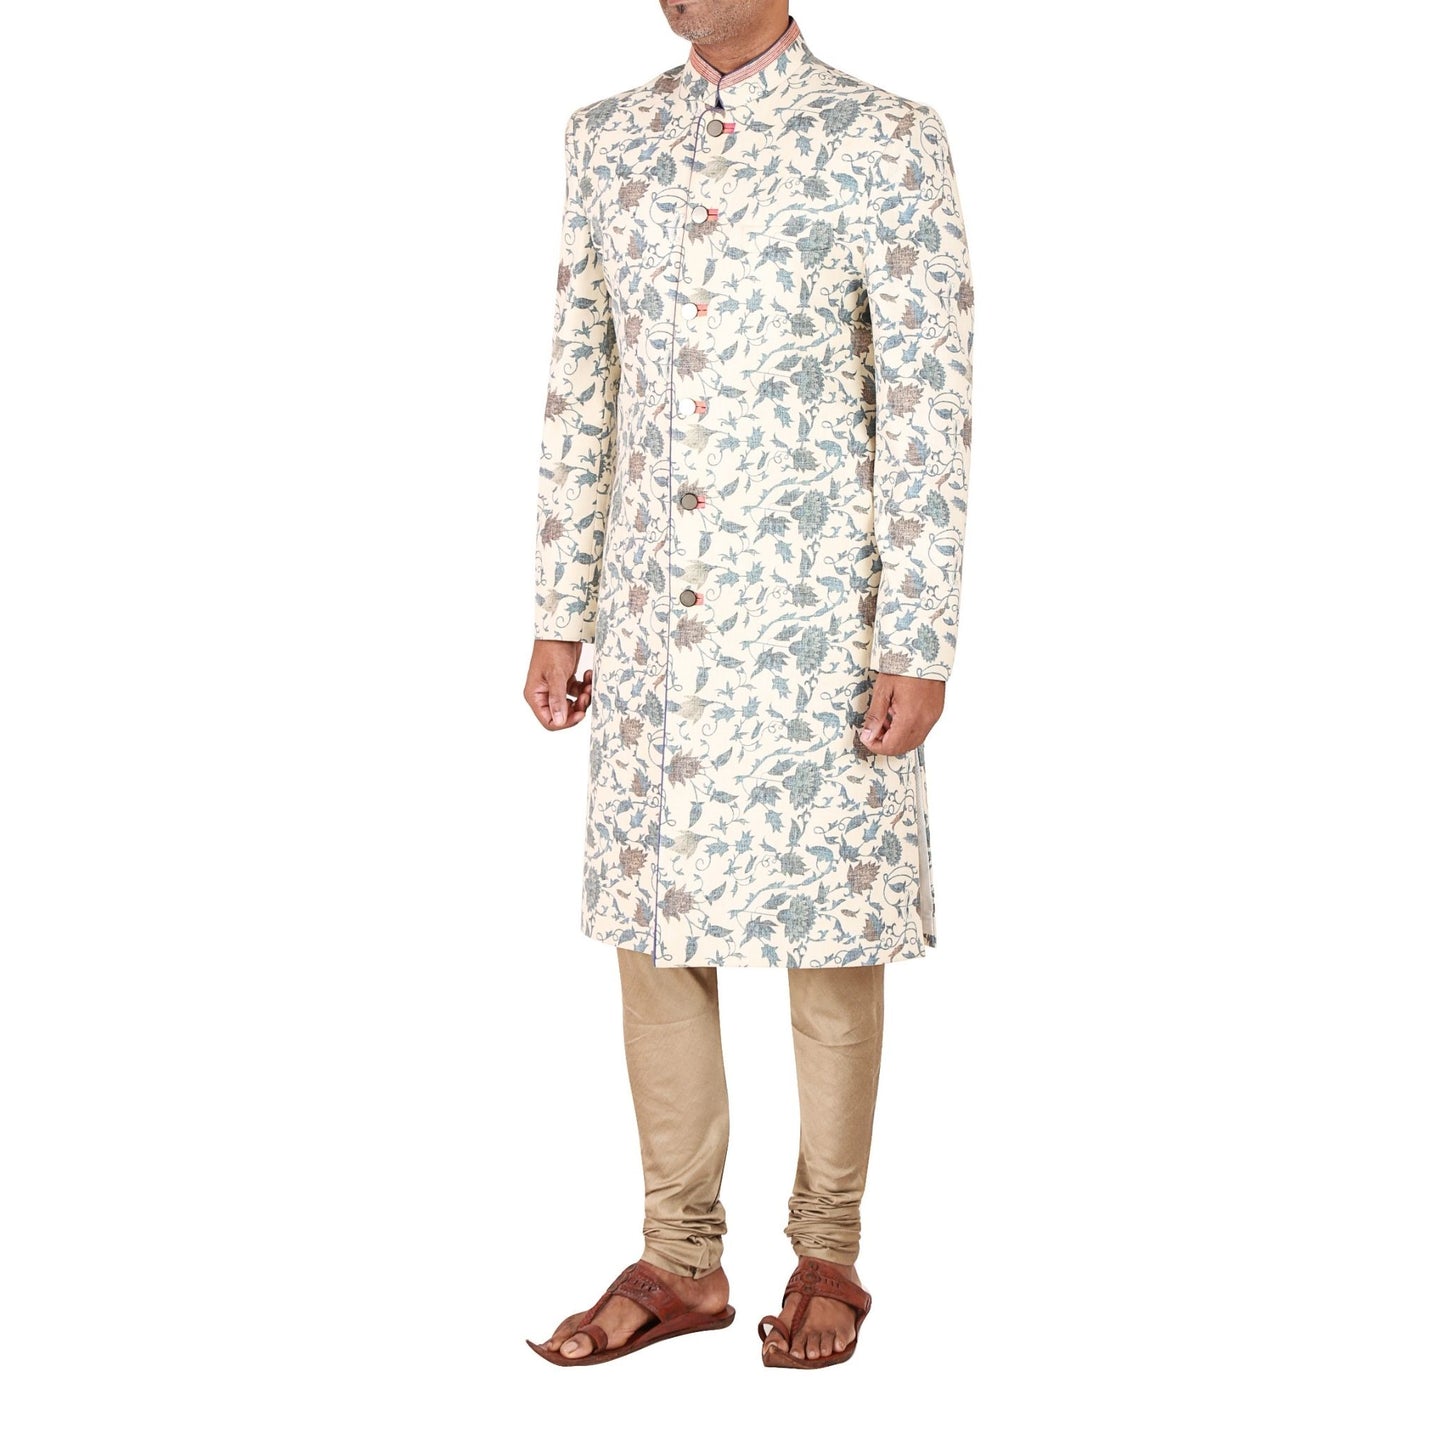 Fitted sherwani in floral printed linen blend suting